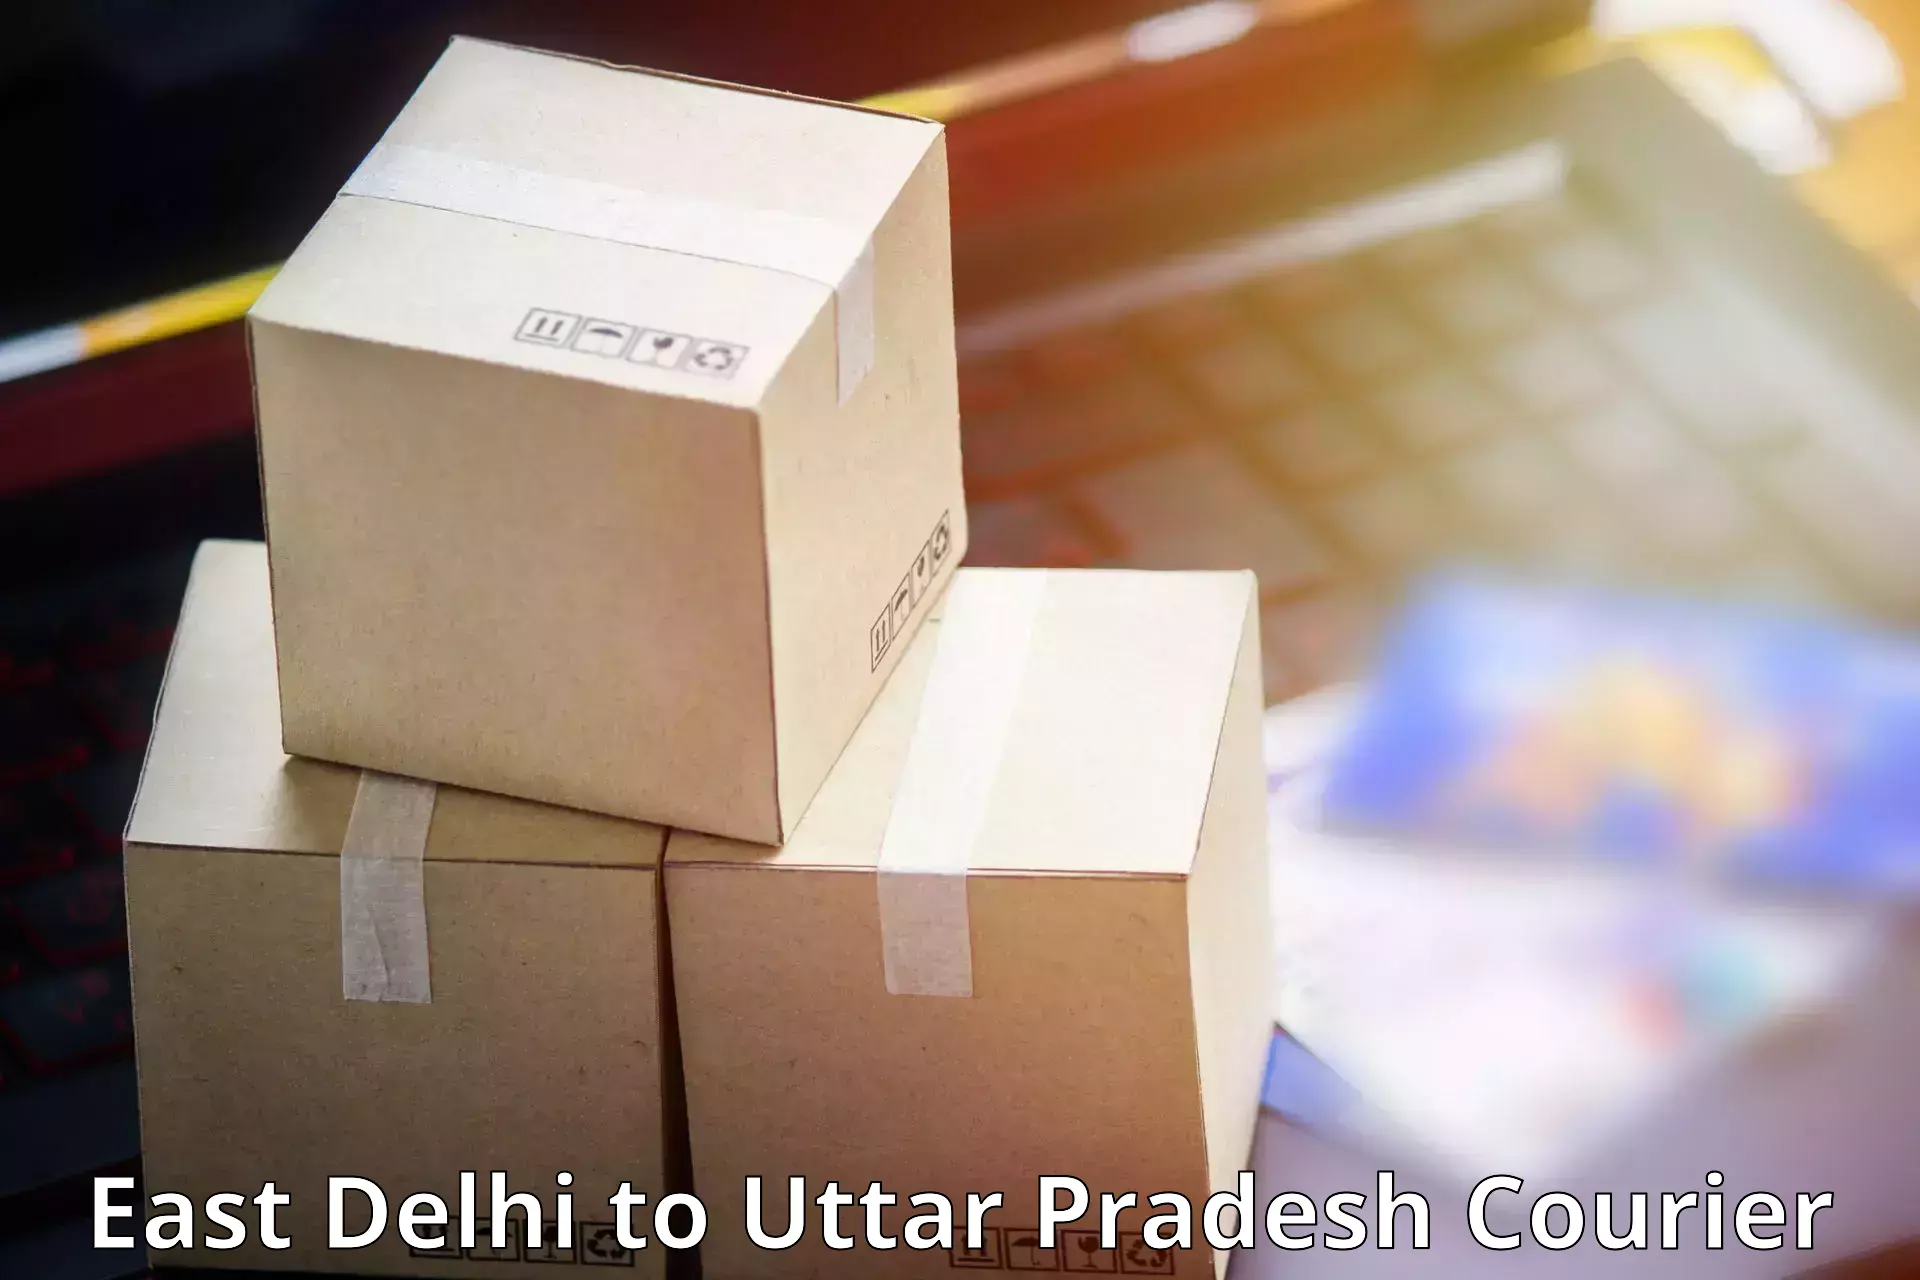 Multi-national courier services East Delhi to Bansi